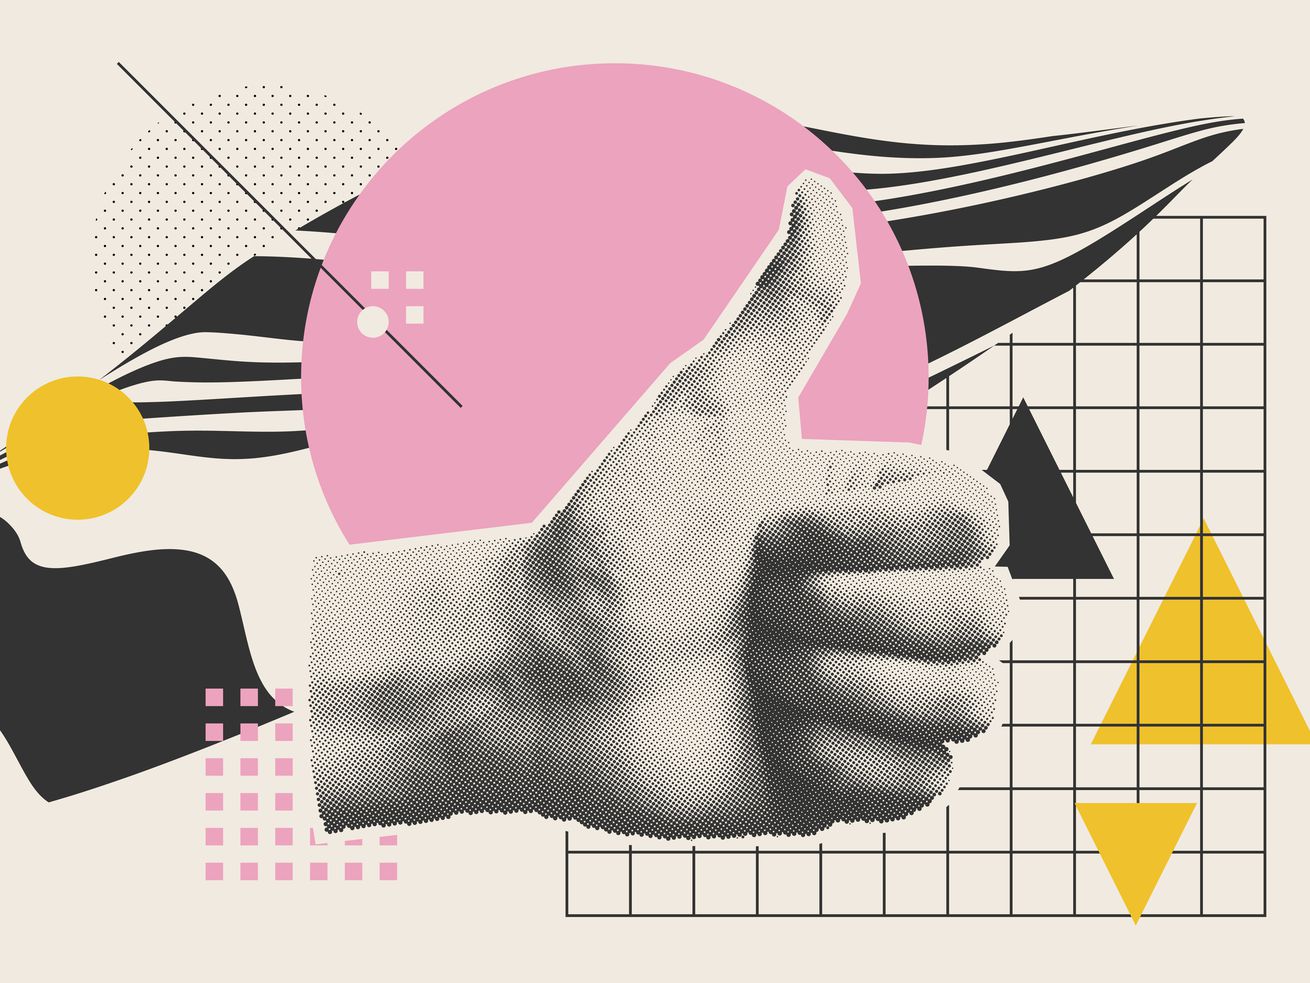 A collage-style image with a black-and-white photograph of a thumbs up surrounded by geometric shapes, like a grid, black and yellow triangles, pink and yellow circles, and black and white stripes.